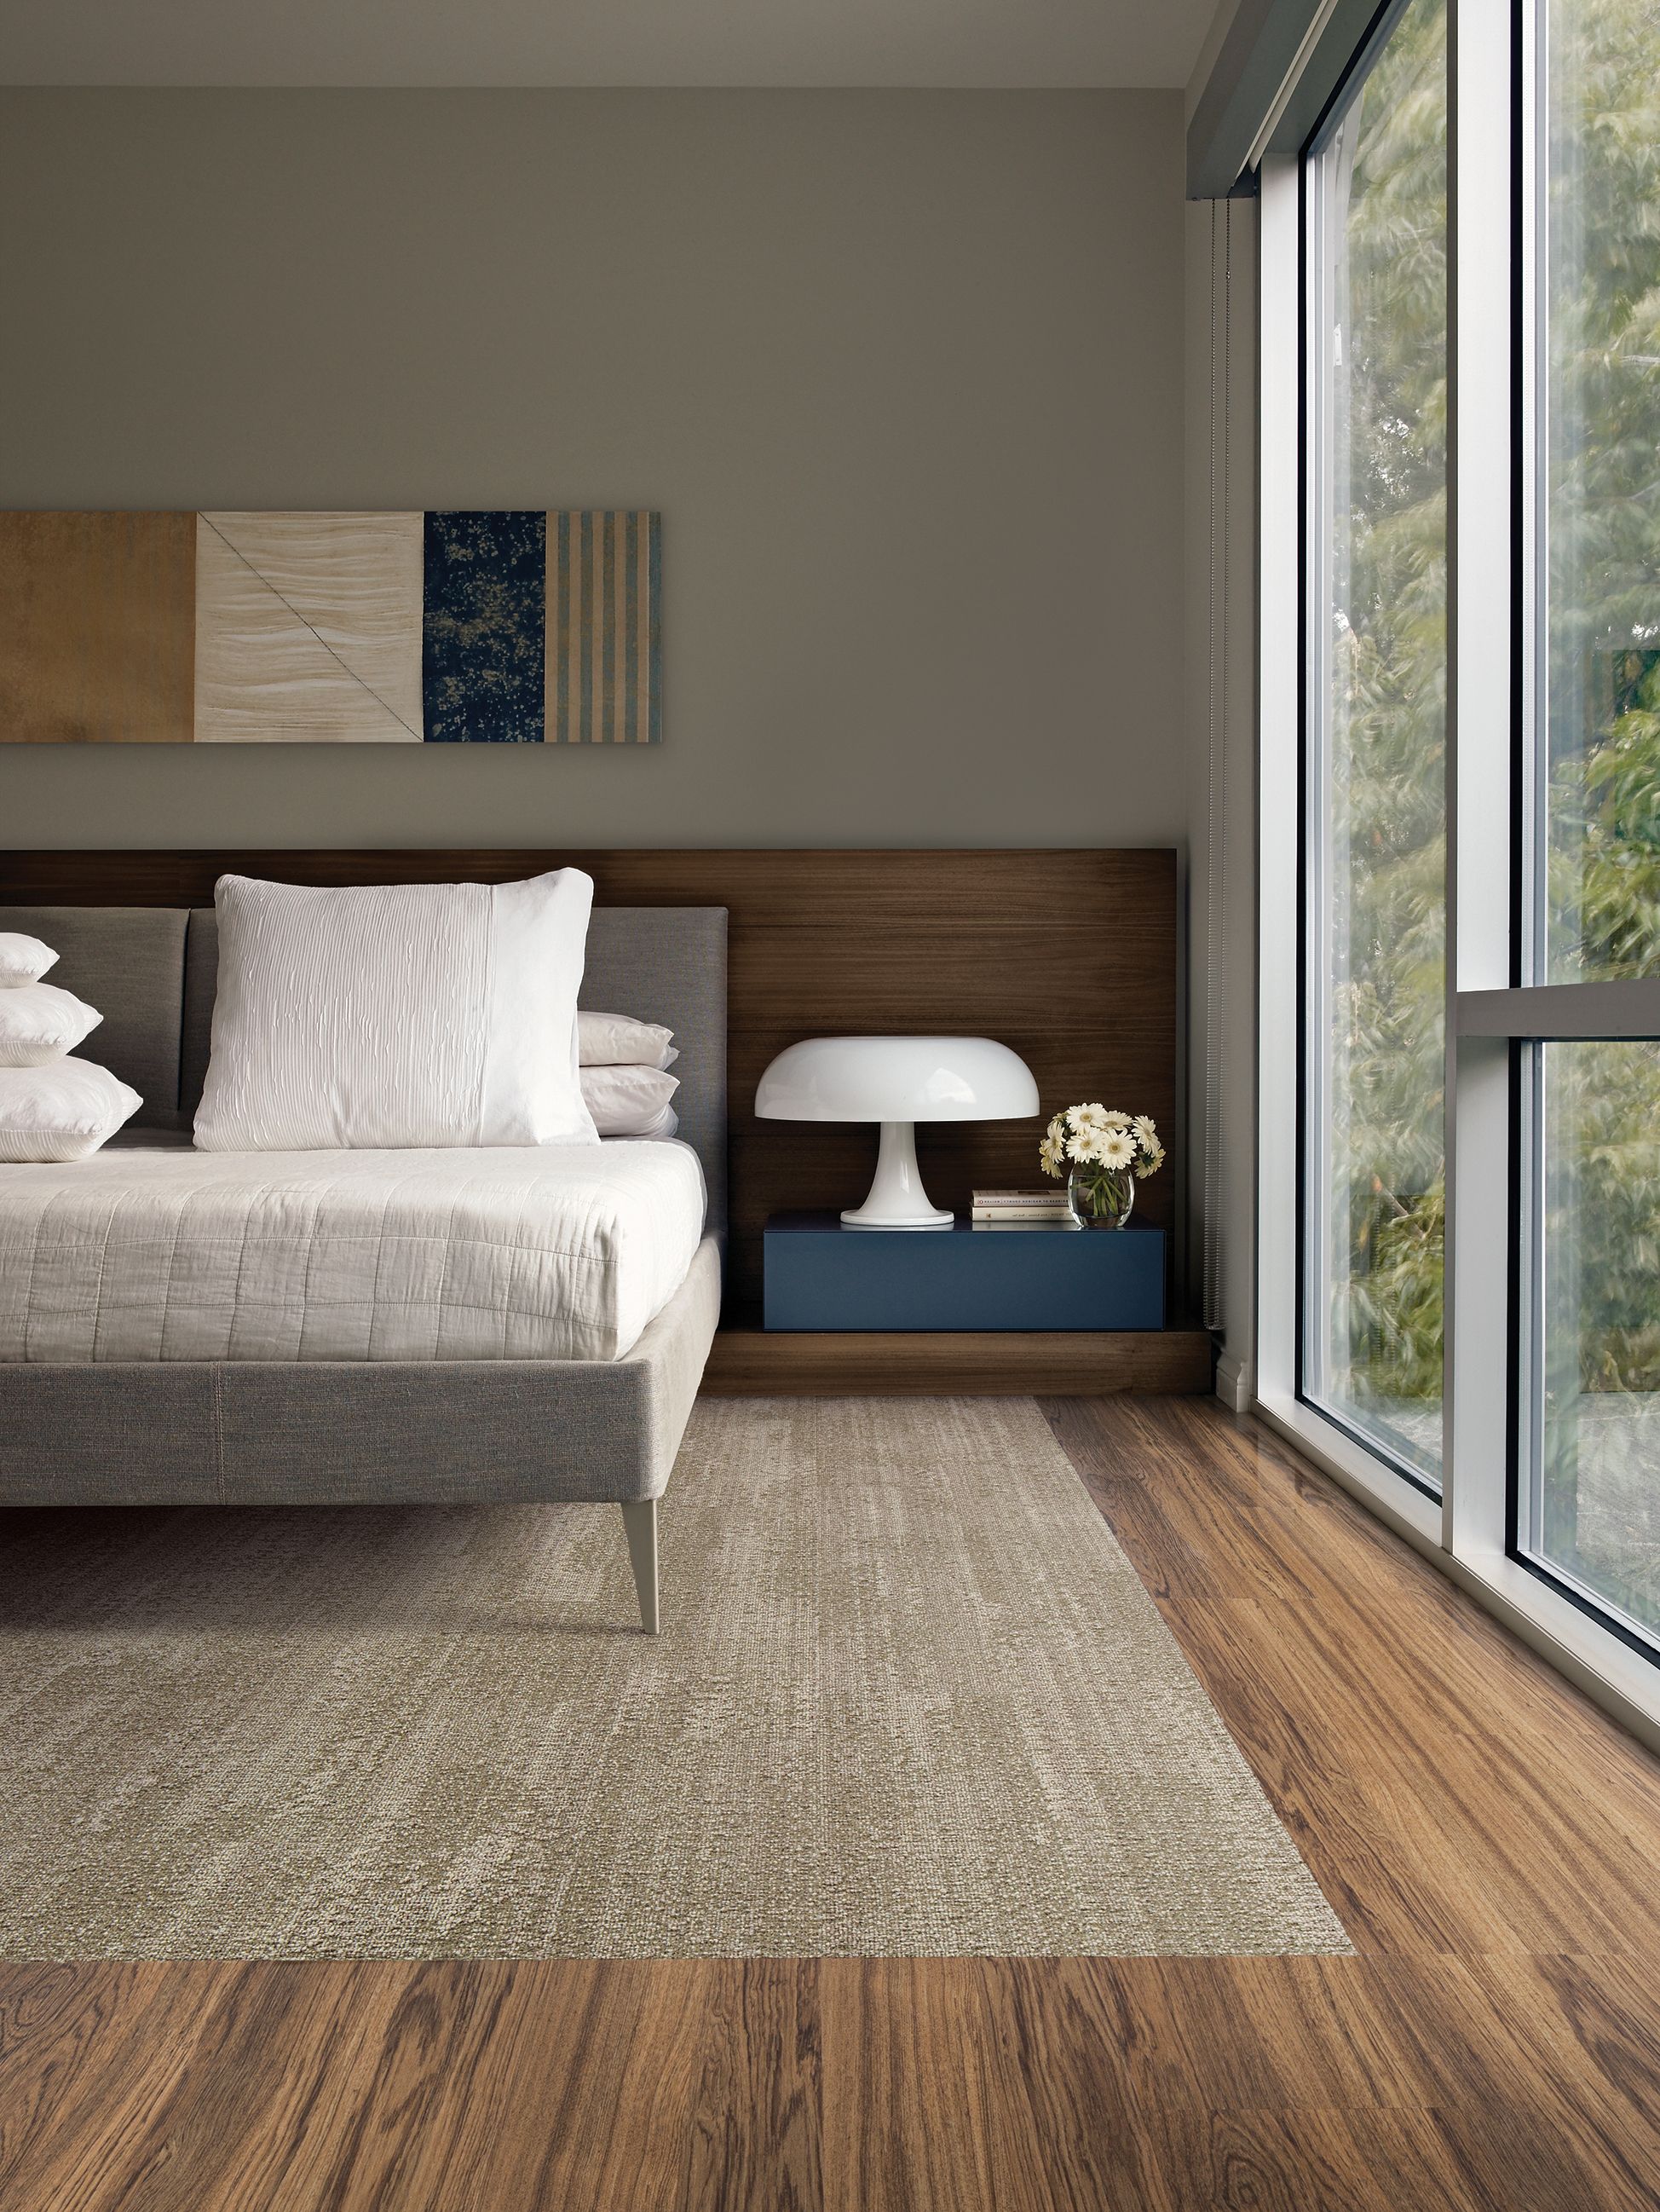 Interface RMS 704 plank carpet tile and Natural Woodgrains LVT in hotel guest room with white lamp imagen número 7